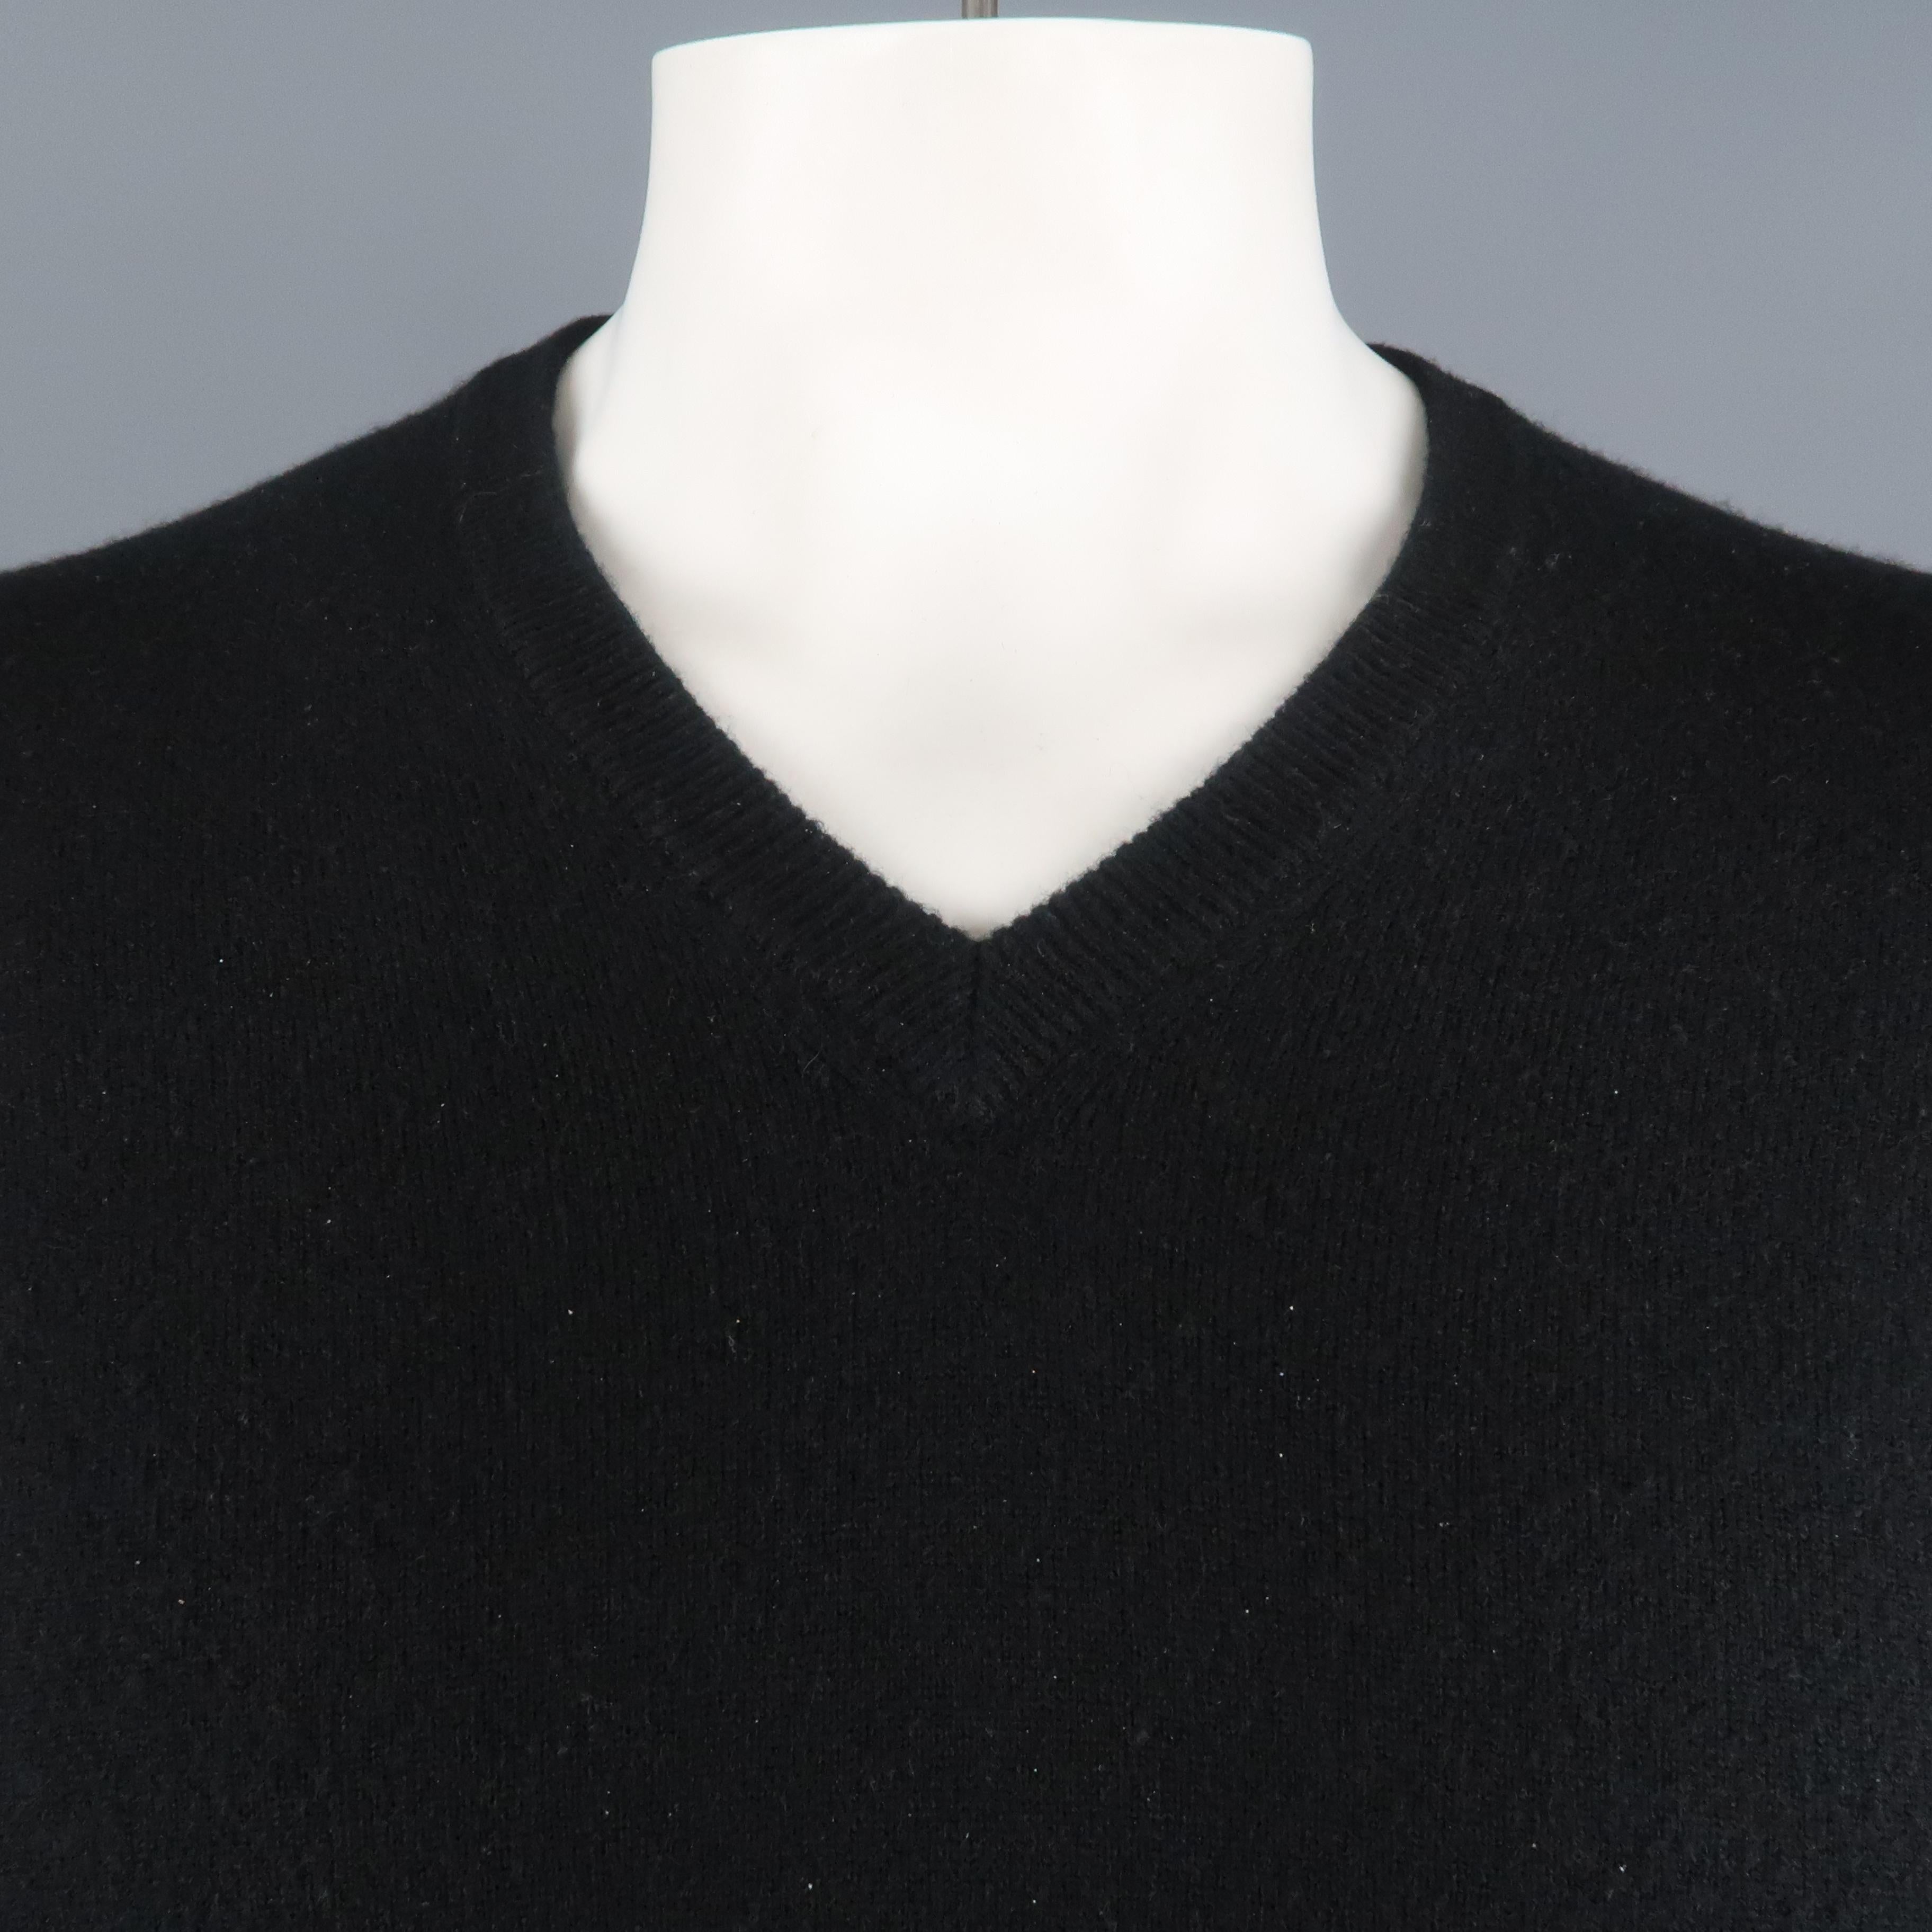 BRUNELLO CUCINELLI sweater comes in a black cashmere featuring a v-neck. Made in Italy.
 
Very Good Pre-Owned Condition.
Marked: IT 46
 
Measurements:
 
Shoulder: 17.5 in.
Chest: 42 in.
Sleeve: 25.5 in.
Length: 24.5 in.